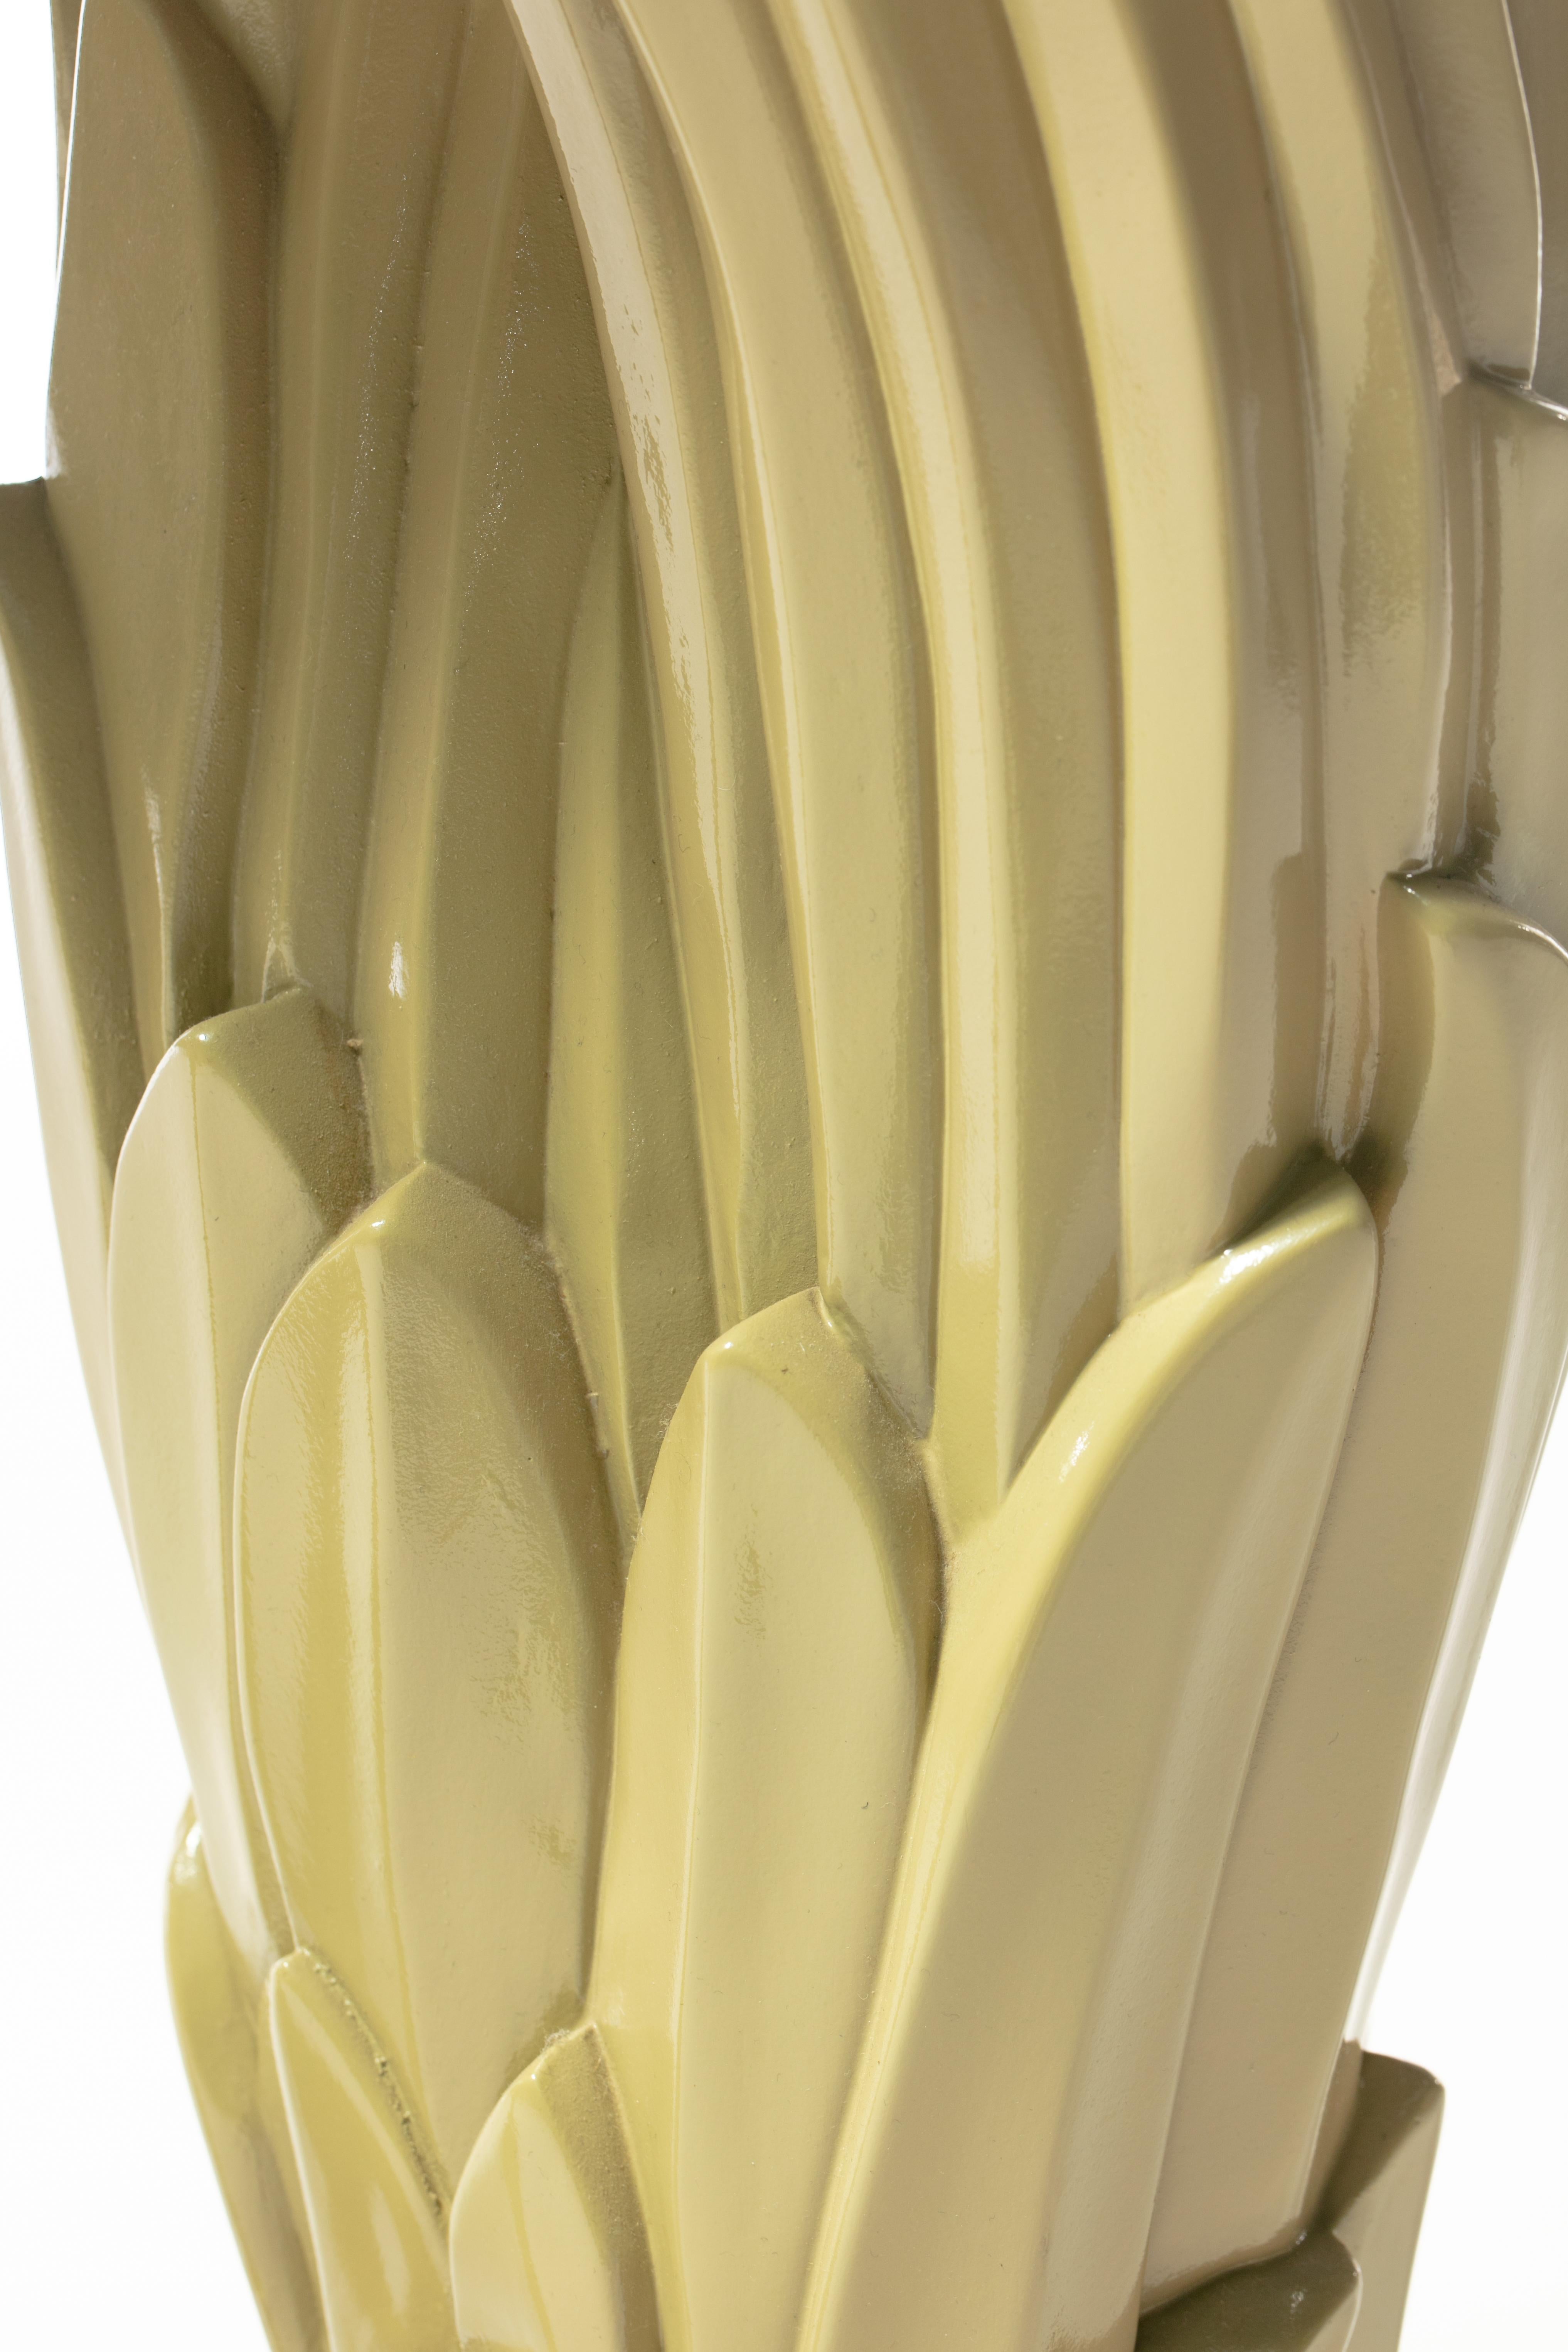 Art Deco Serge Roche Style Palm Leaf Console Lacquered in Almond Latte c. 1980 For Sale 7